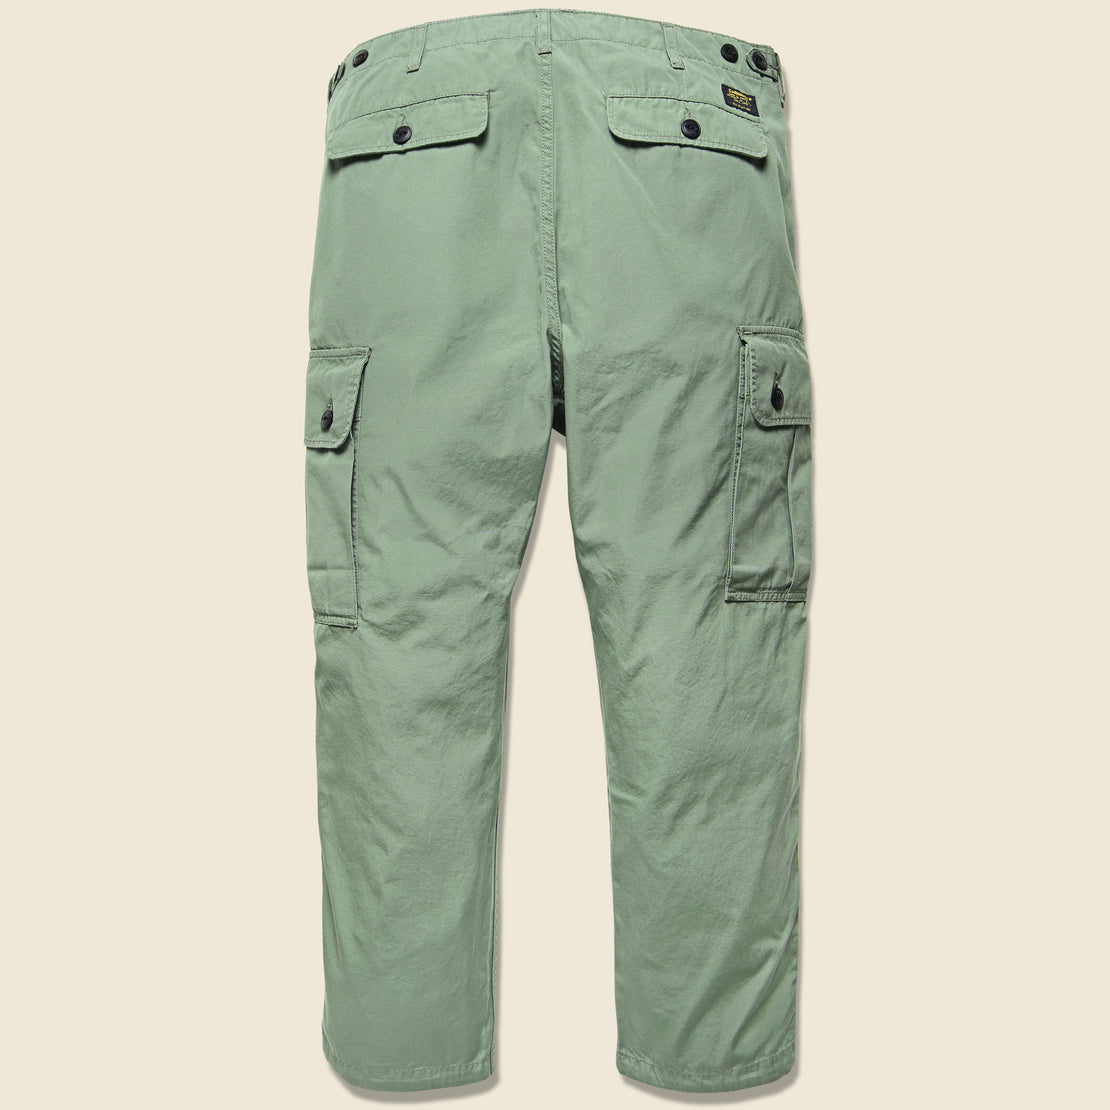 Shelter Cargo Pant - Dollar Green - Carhartt WIP - STAG Provisions - Pants - Twill